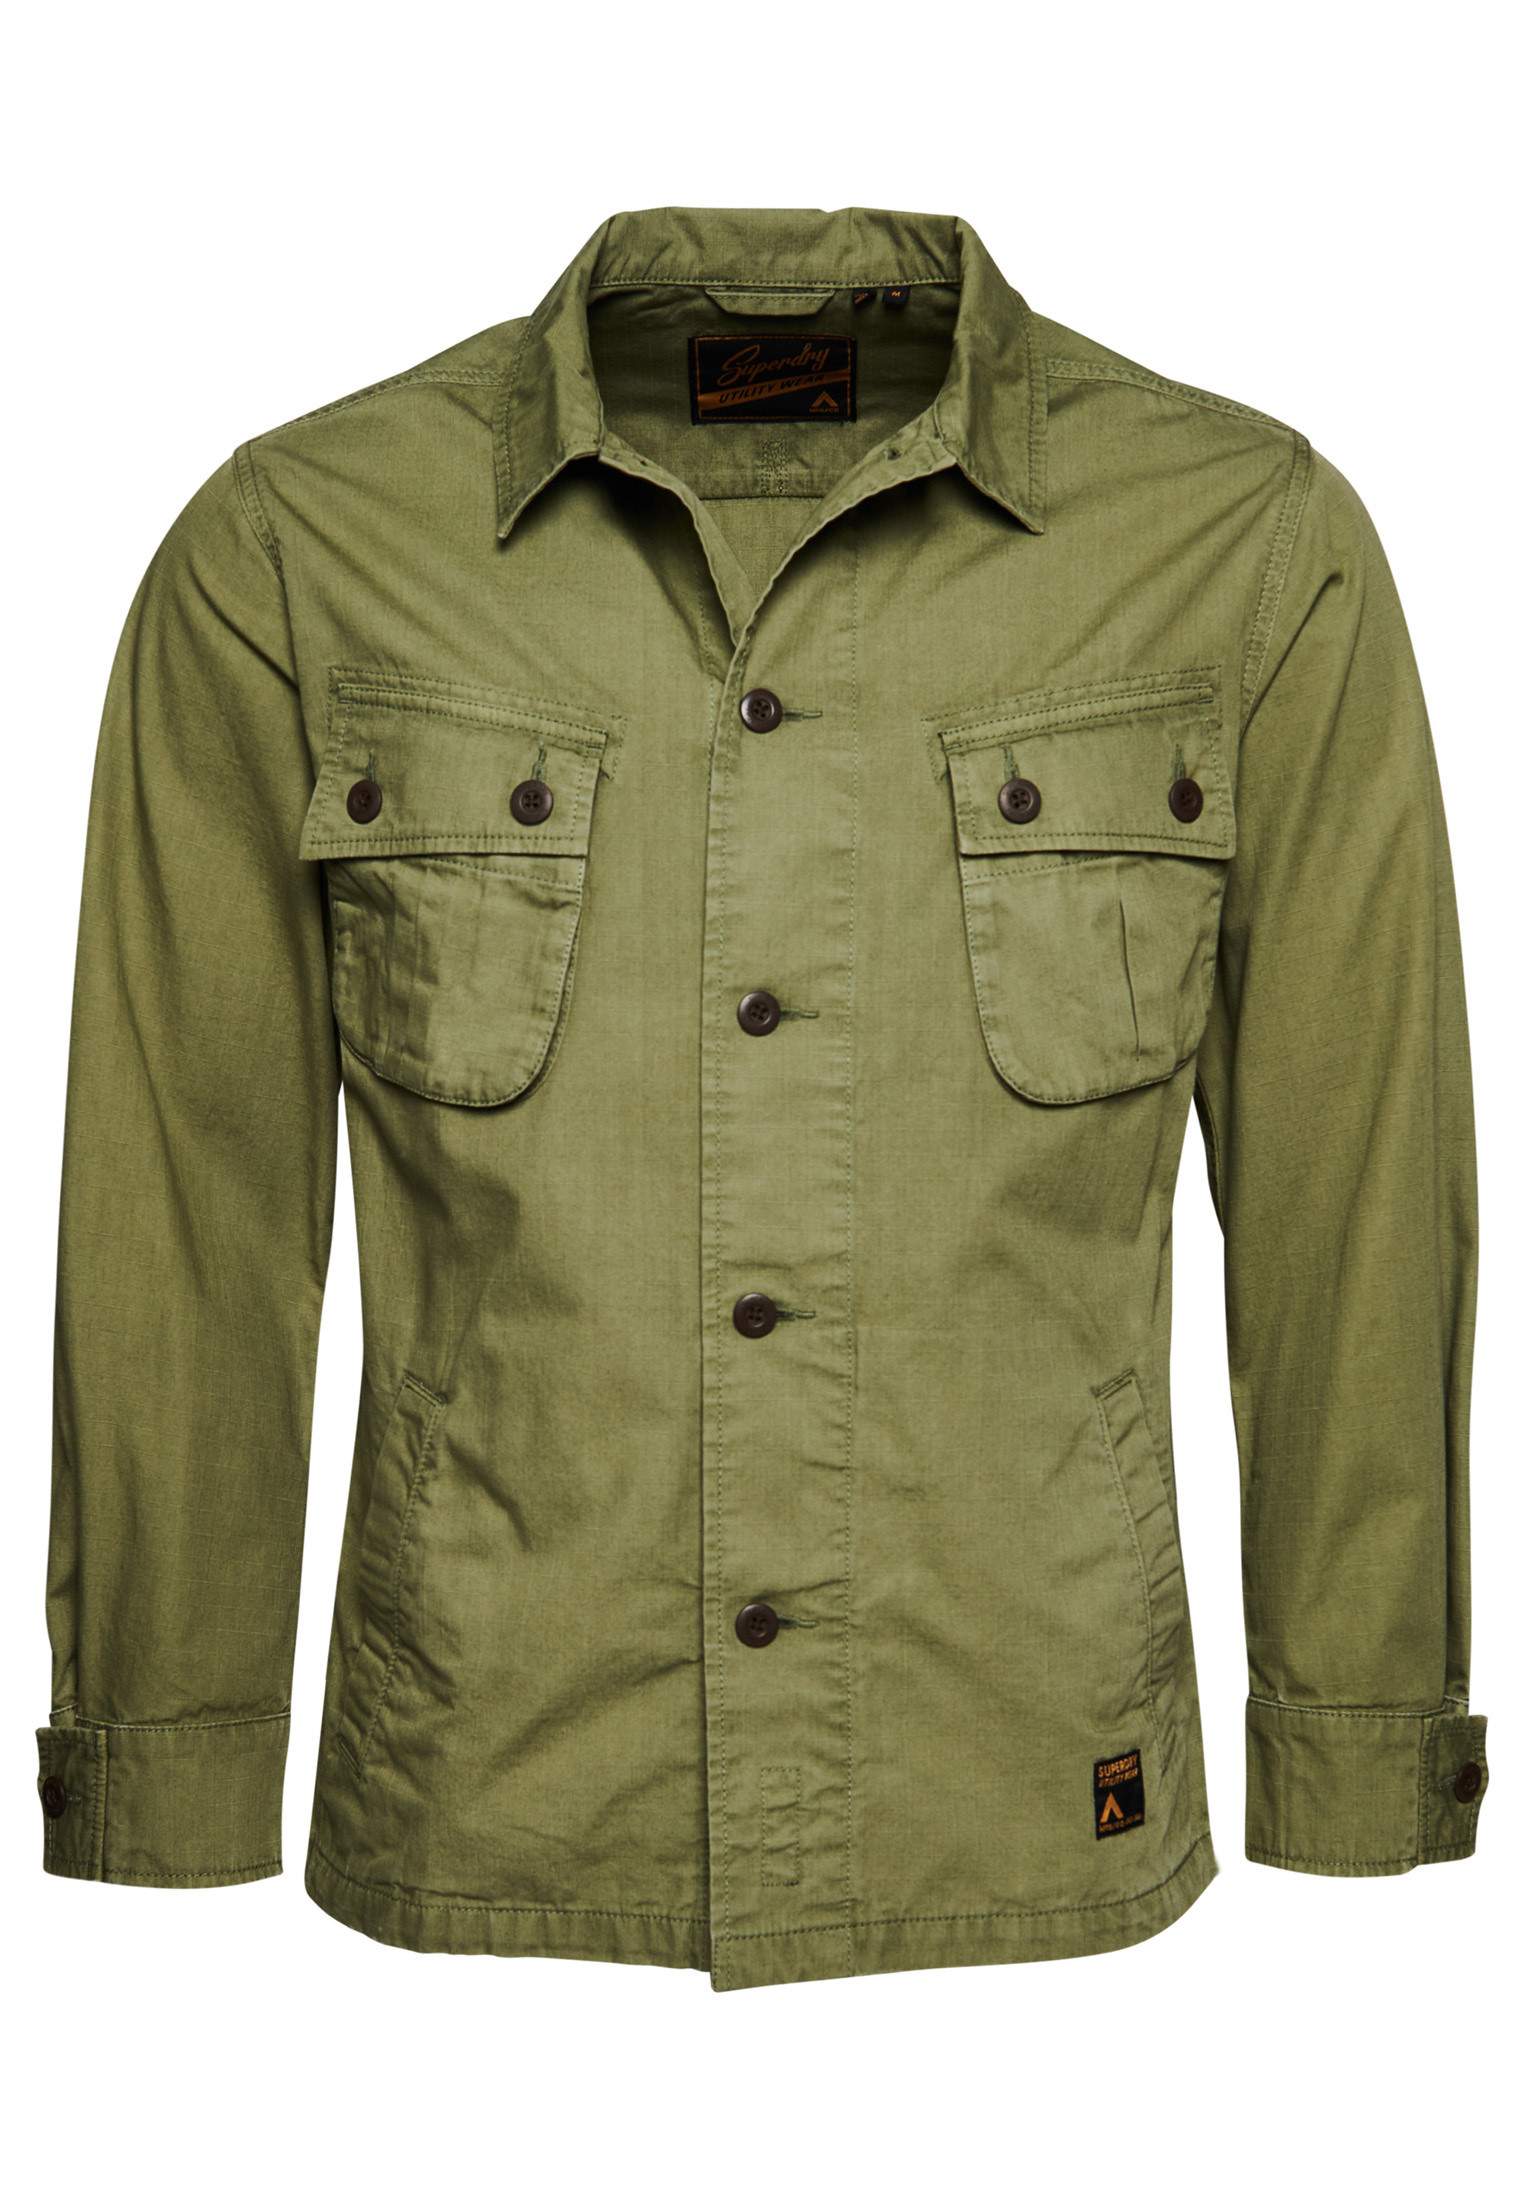 Superdry - Giacca sahariana in cotone, Verde, large image number 0